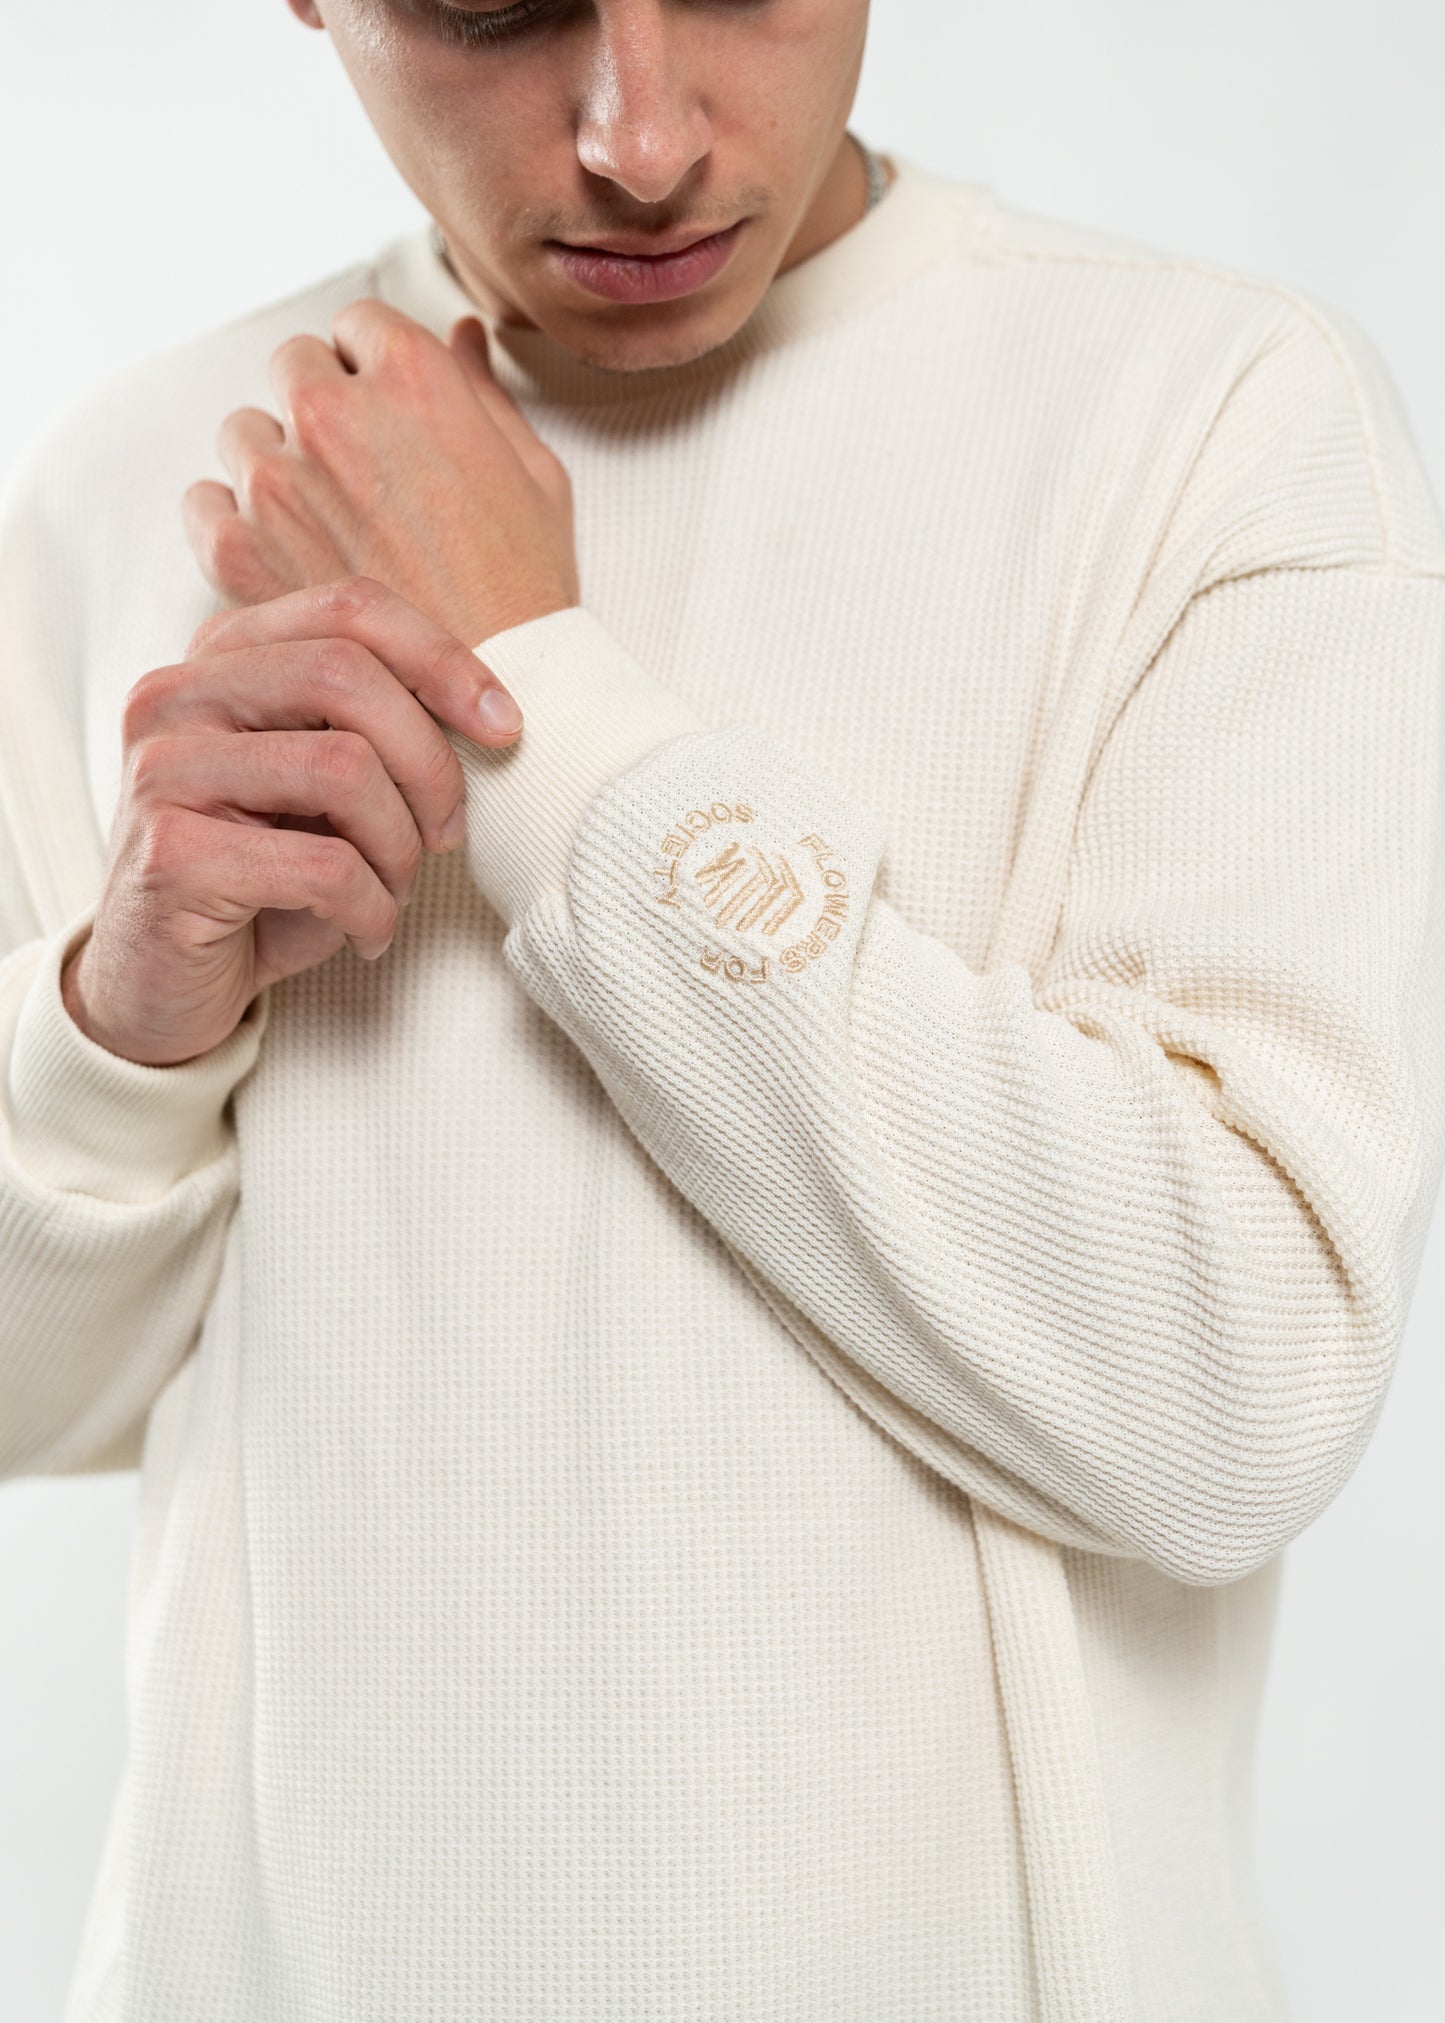 Flowers for Society waffle longsleeve off white side view detailed shot on Flowers for Society embroidered logo on the sleeve worn by model Ben standing